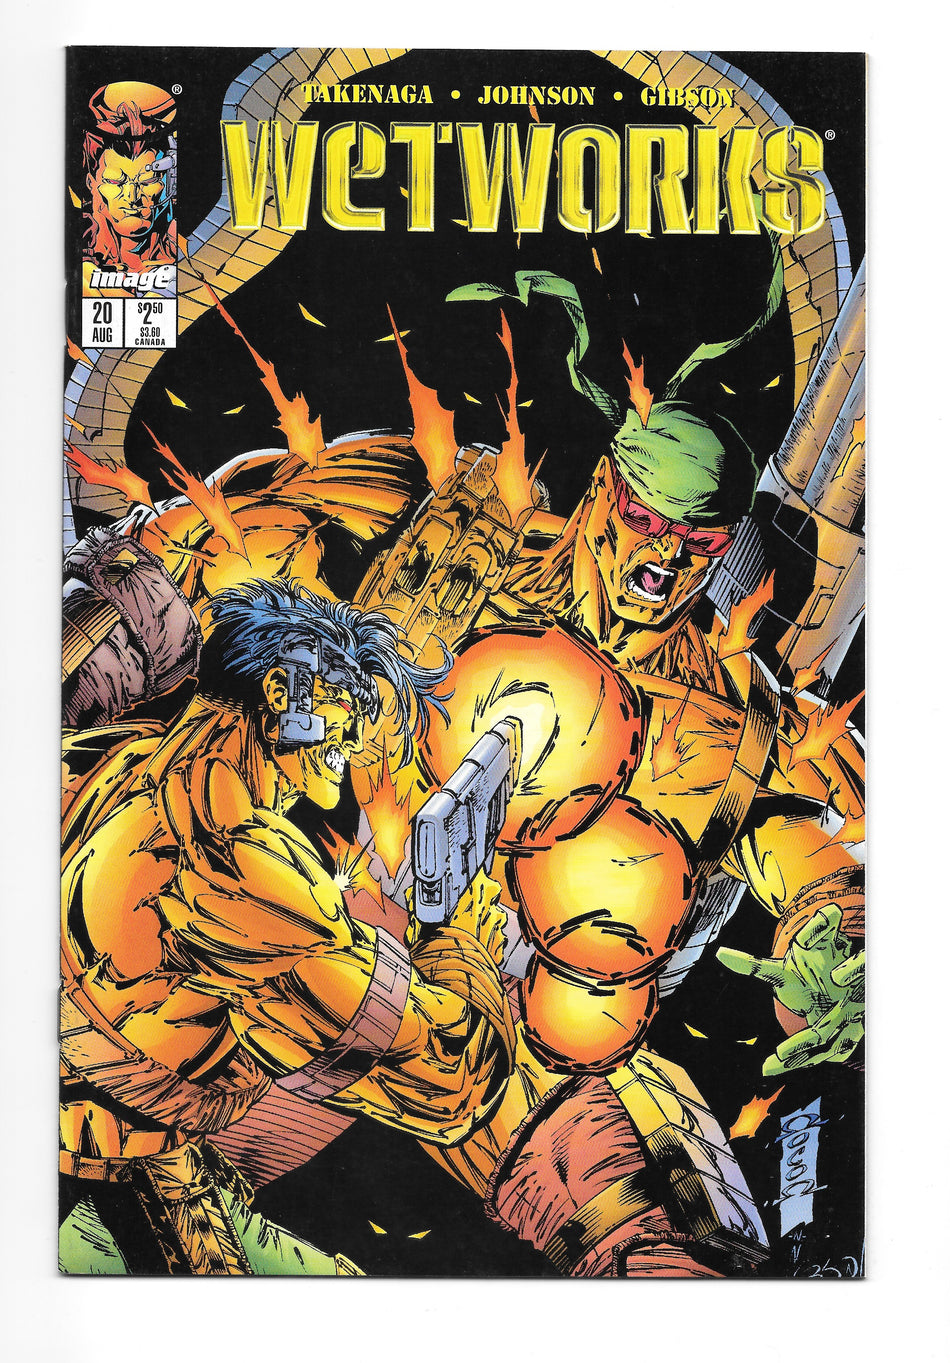 Photo of Wetworks, Vol. 1 (1996)  Iss 20 Near Mint  Comic sold by Stronghold Collectibles